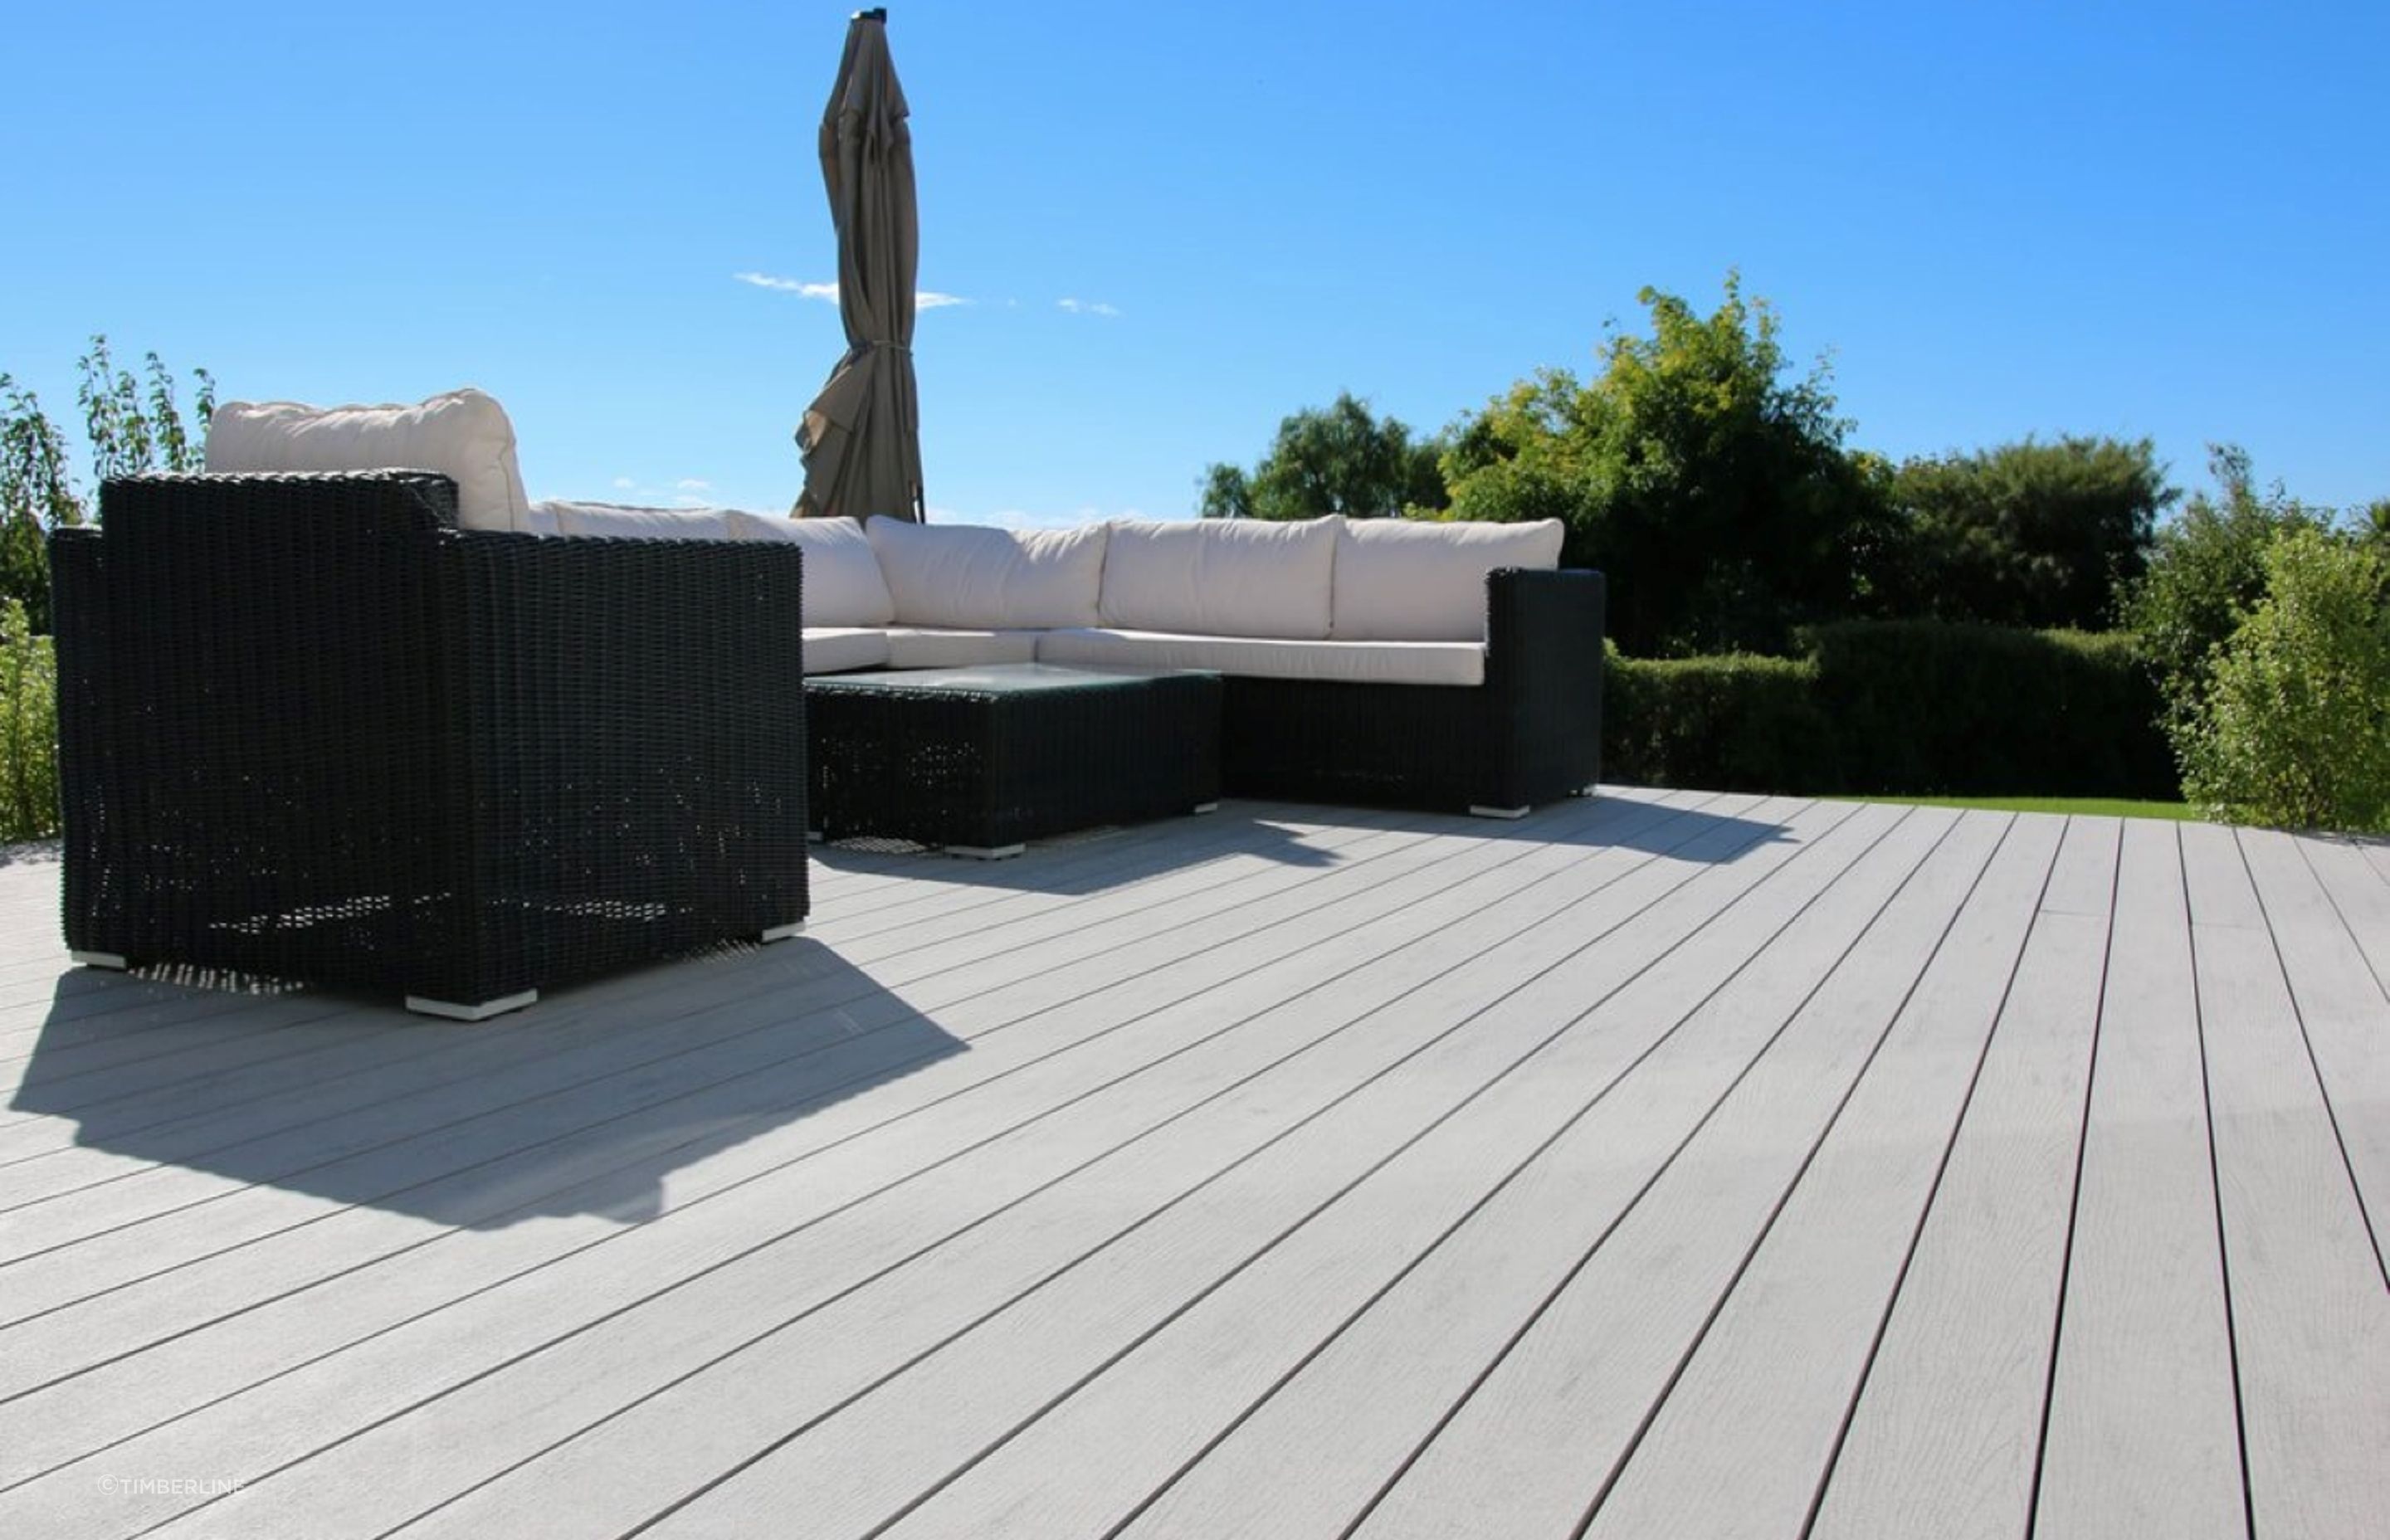 Modwood composite decking demonstrates the seamless, uniform look that can be achieved.